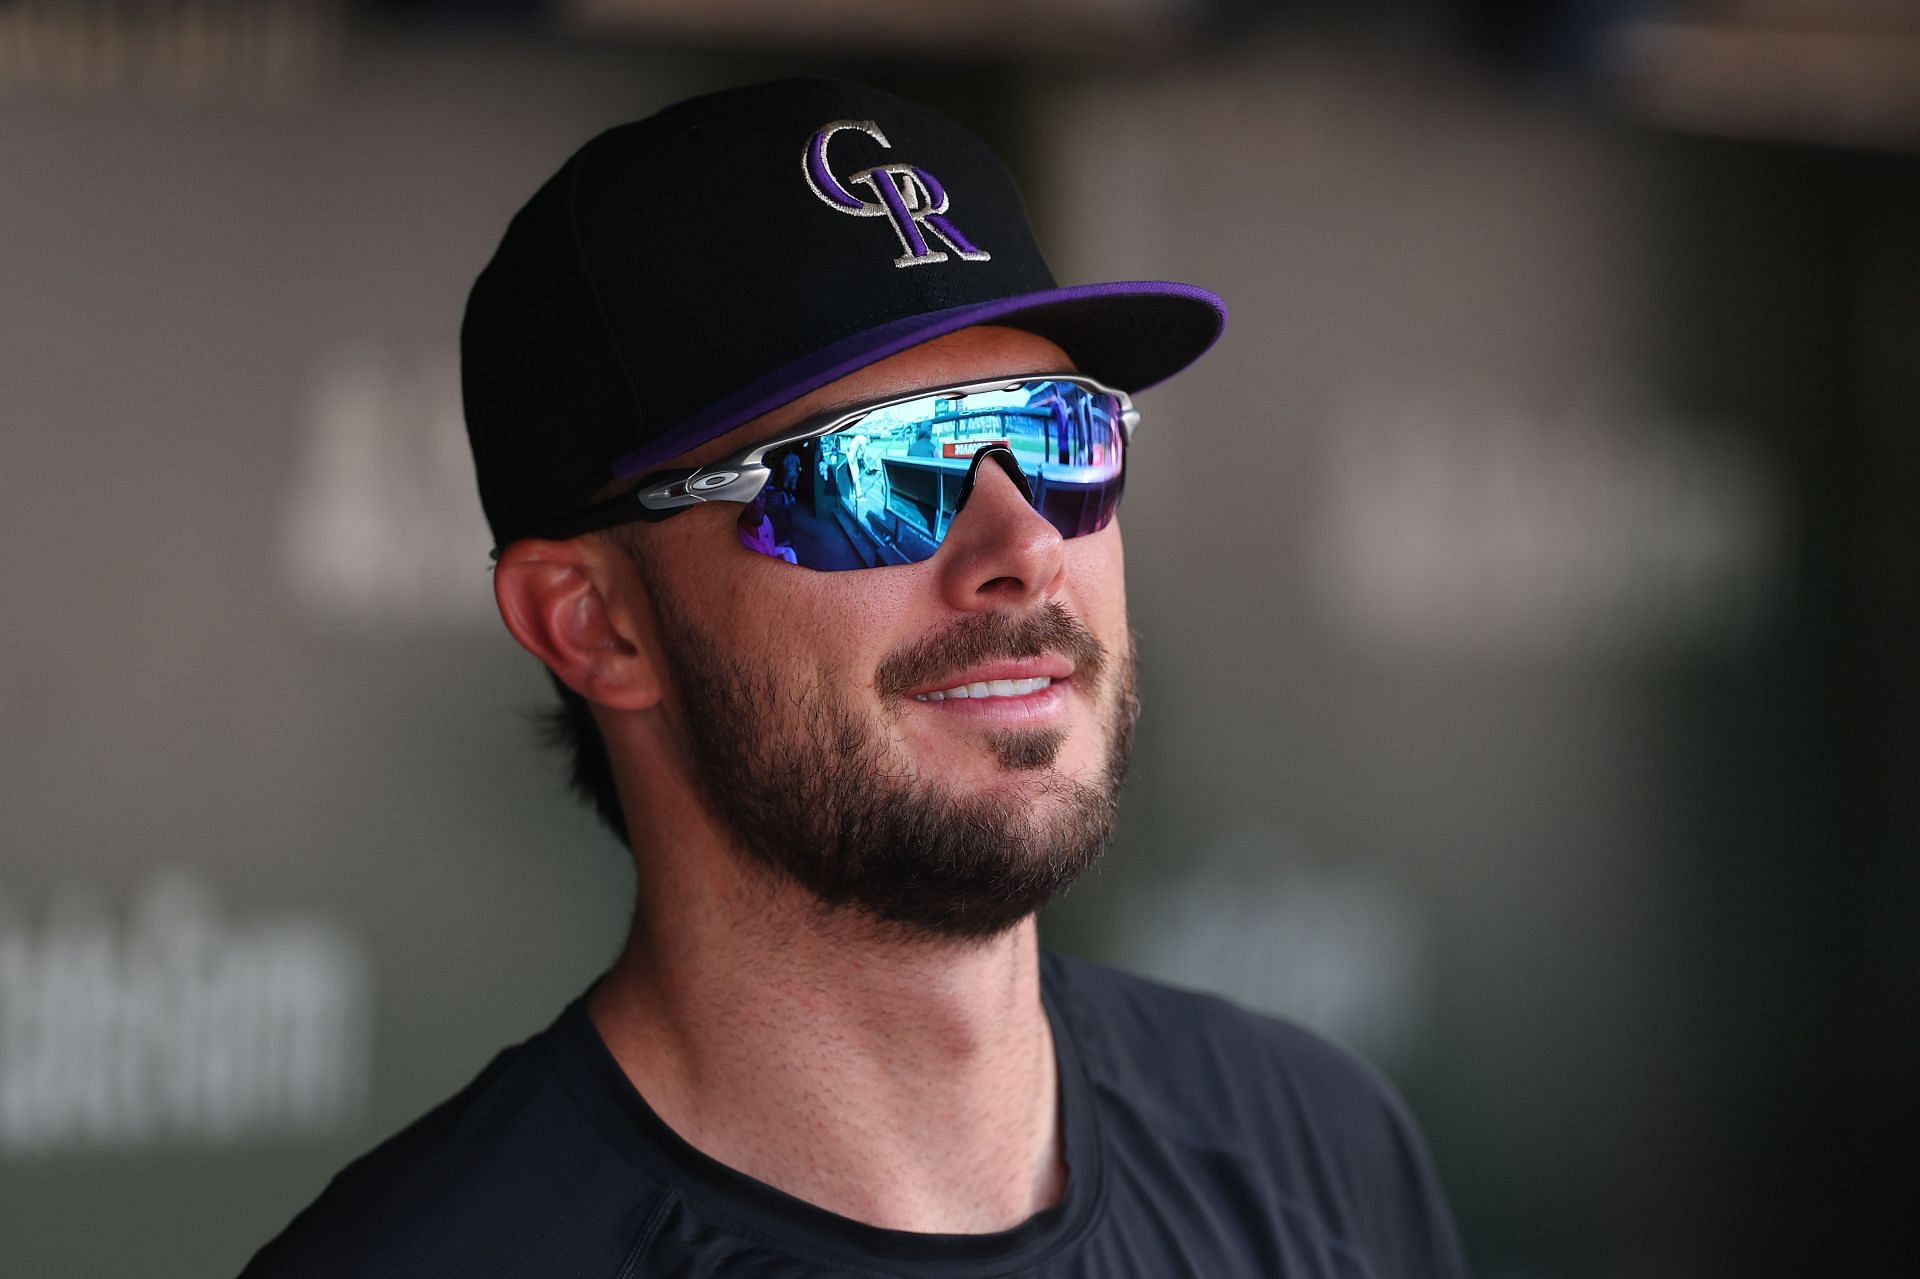 Kris Bryant of the Colorado Rockies looks on from the dugout against the Chicago Cubs at Wrigley Field on September 16, 2022 in Chicago, Illinois. (Photo by Michael Reaves/Getty Images)